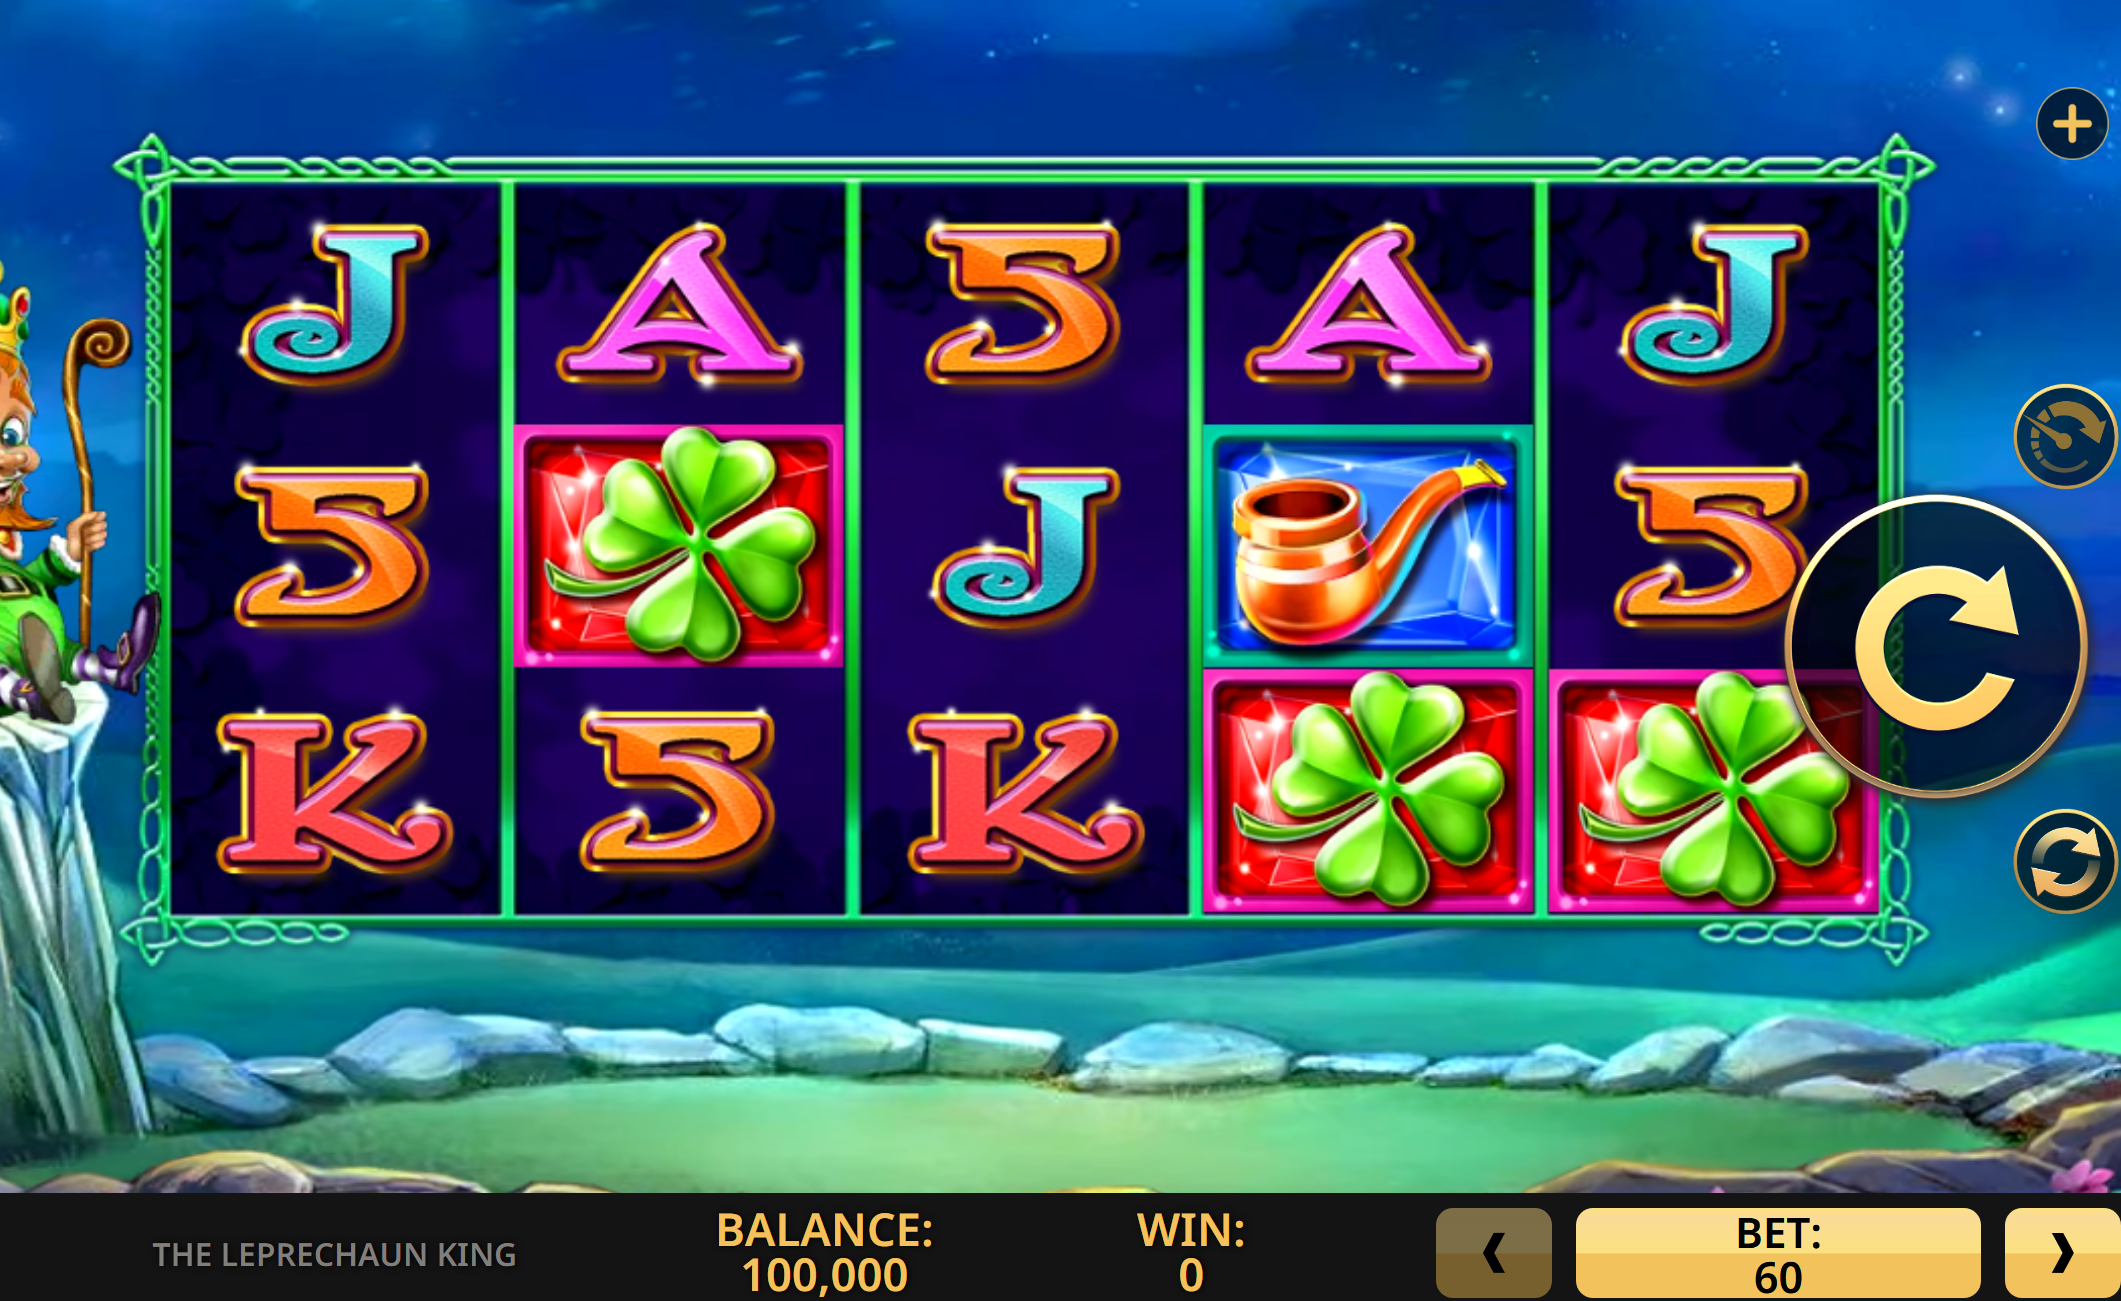 an image of a blue slot machine with symbols such as J , K, four leaf clover and pipe.